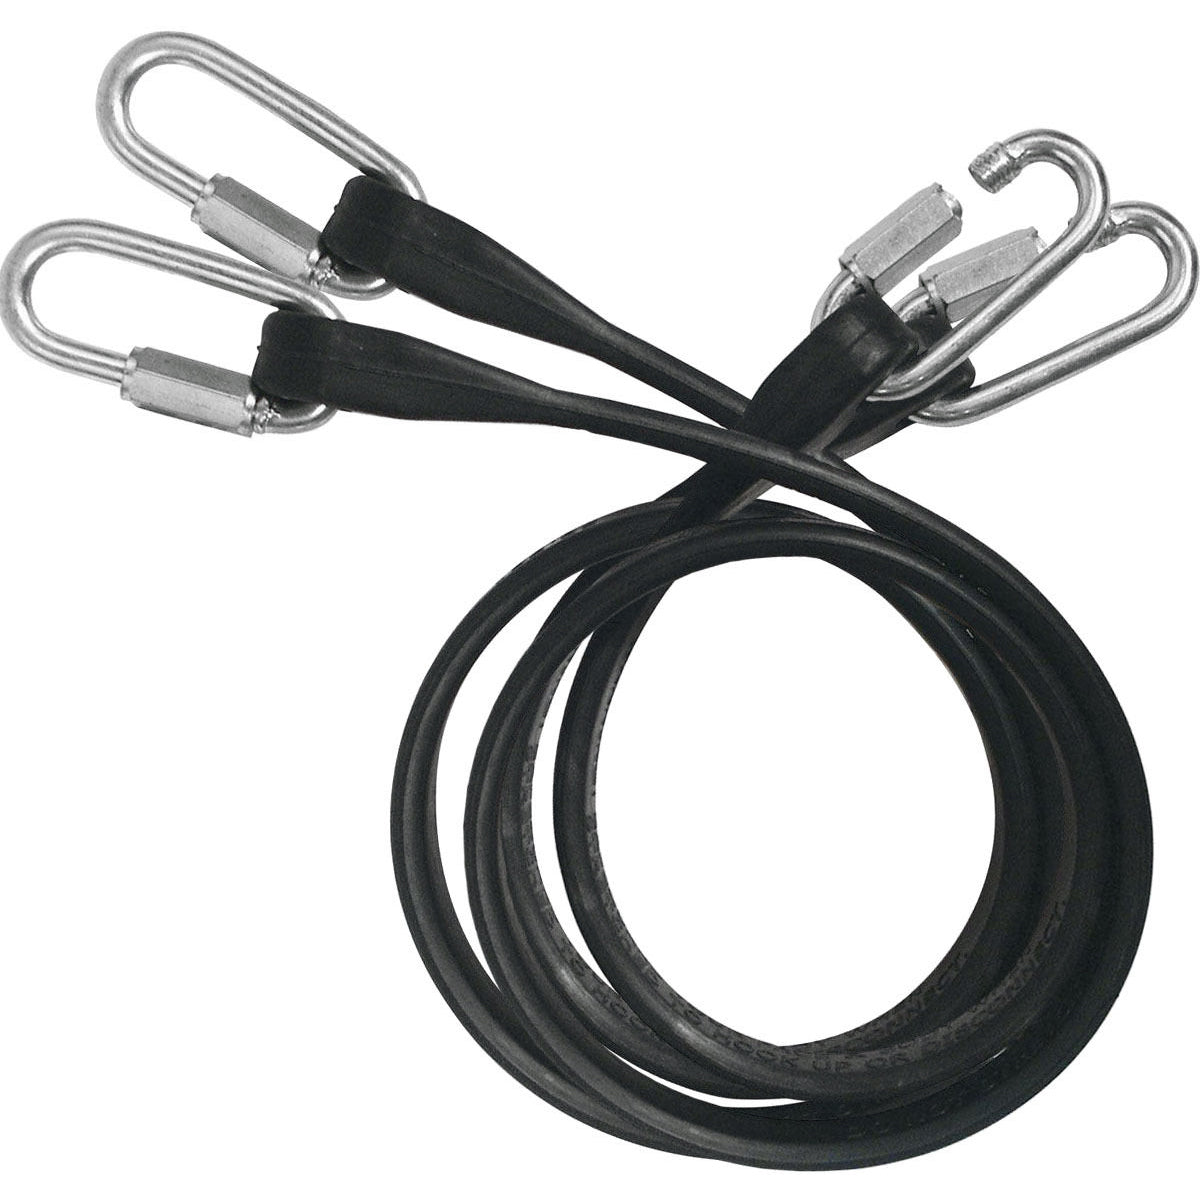 Forza Sports Double End Bag Cables (Pair) Forza Sports